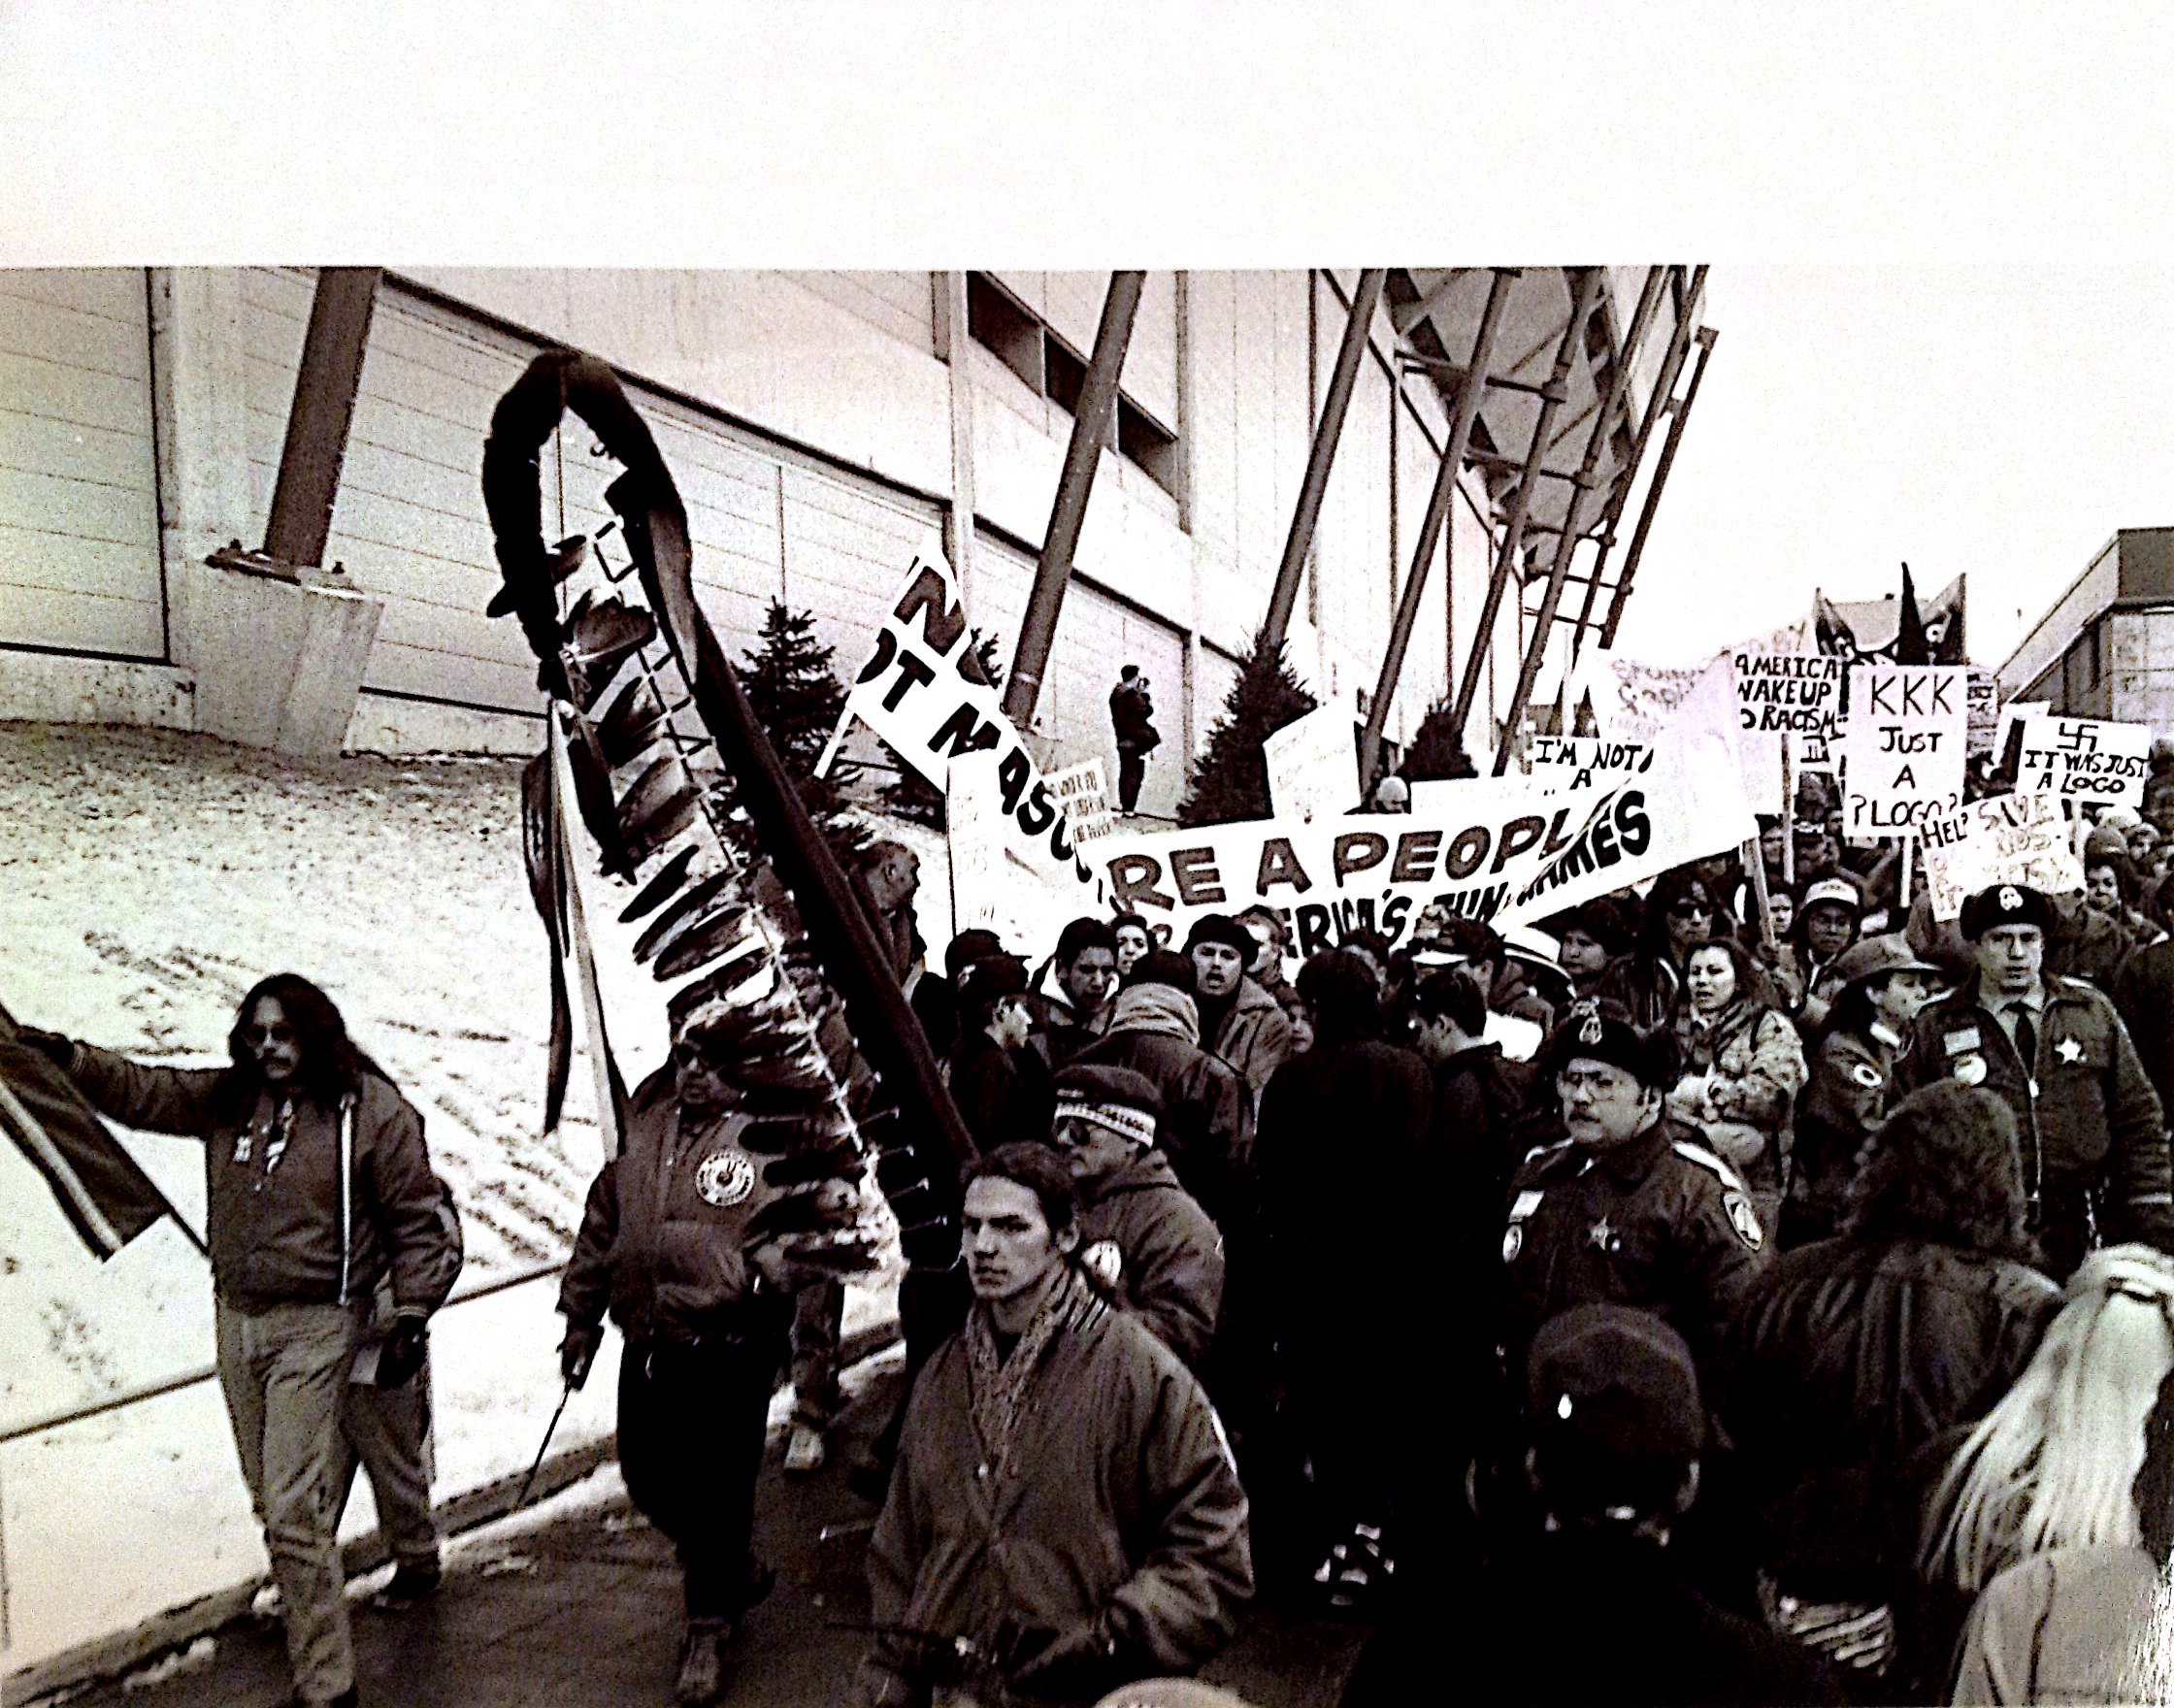 superbowl protest, January 1992, Hennepin History Museum